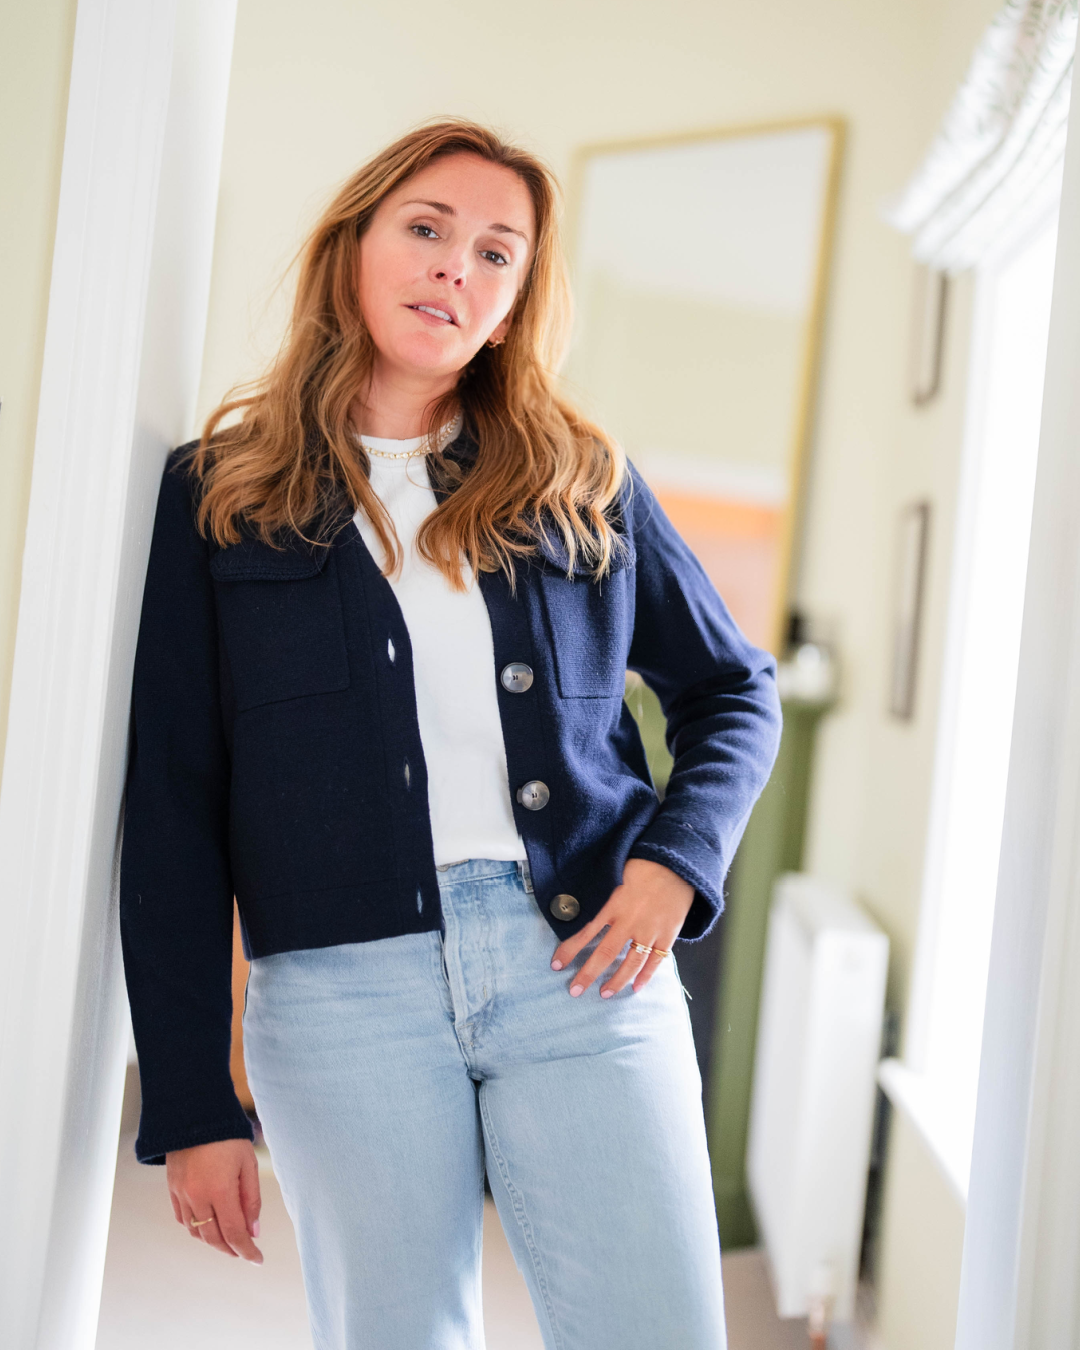 Sezane Clothing Review & Try On: Why I Returned my Entire Order